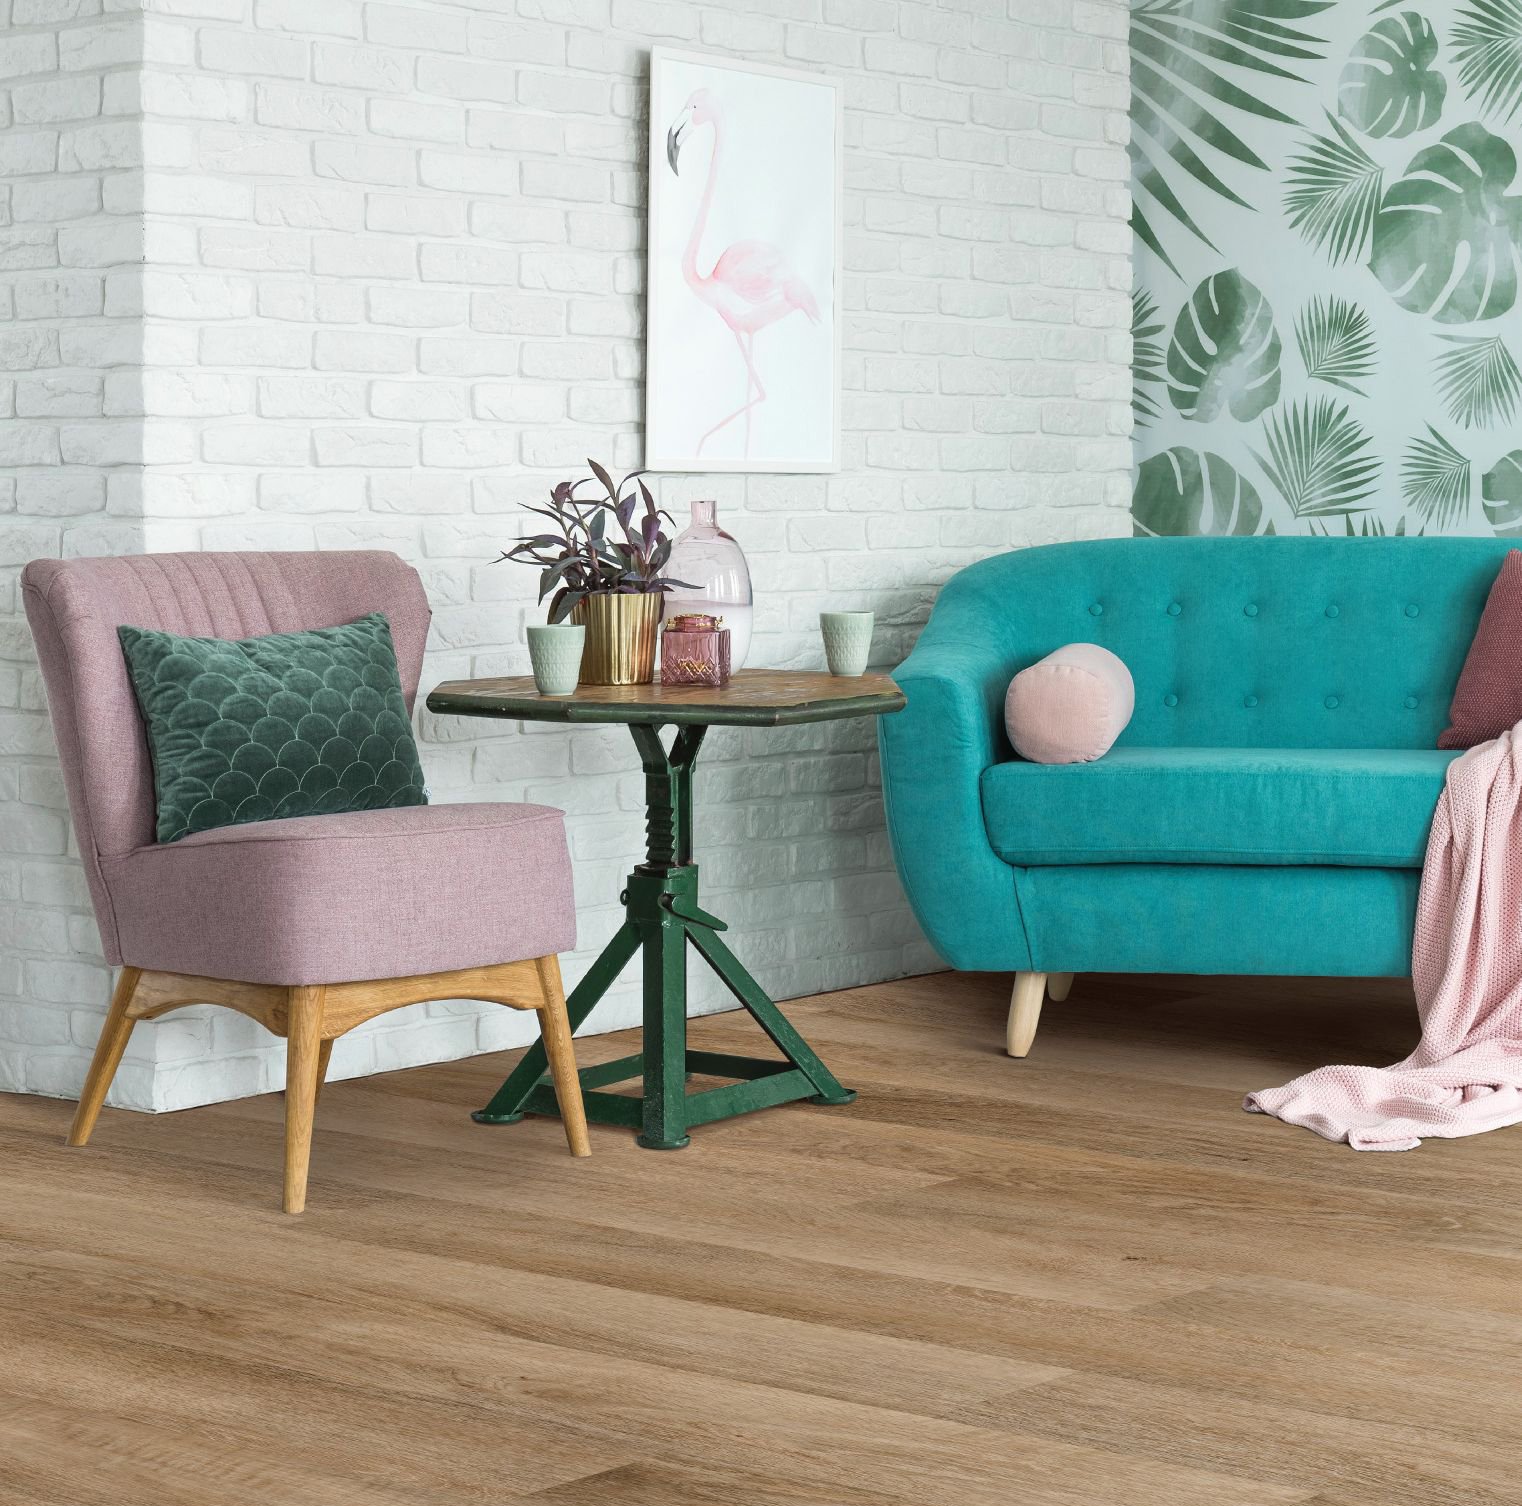 Pink armchair and a blue couch Accidents do happen! But this water resistant flooring gives you time to clean up spills, helping protect your beautiful floor.